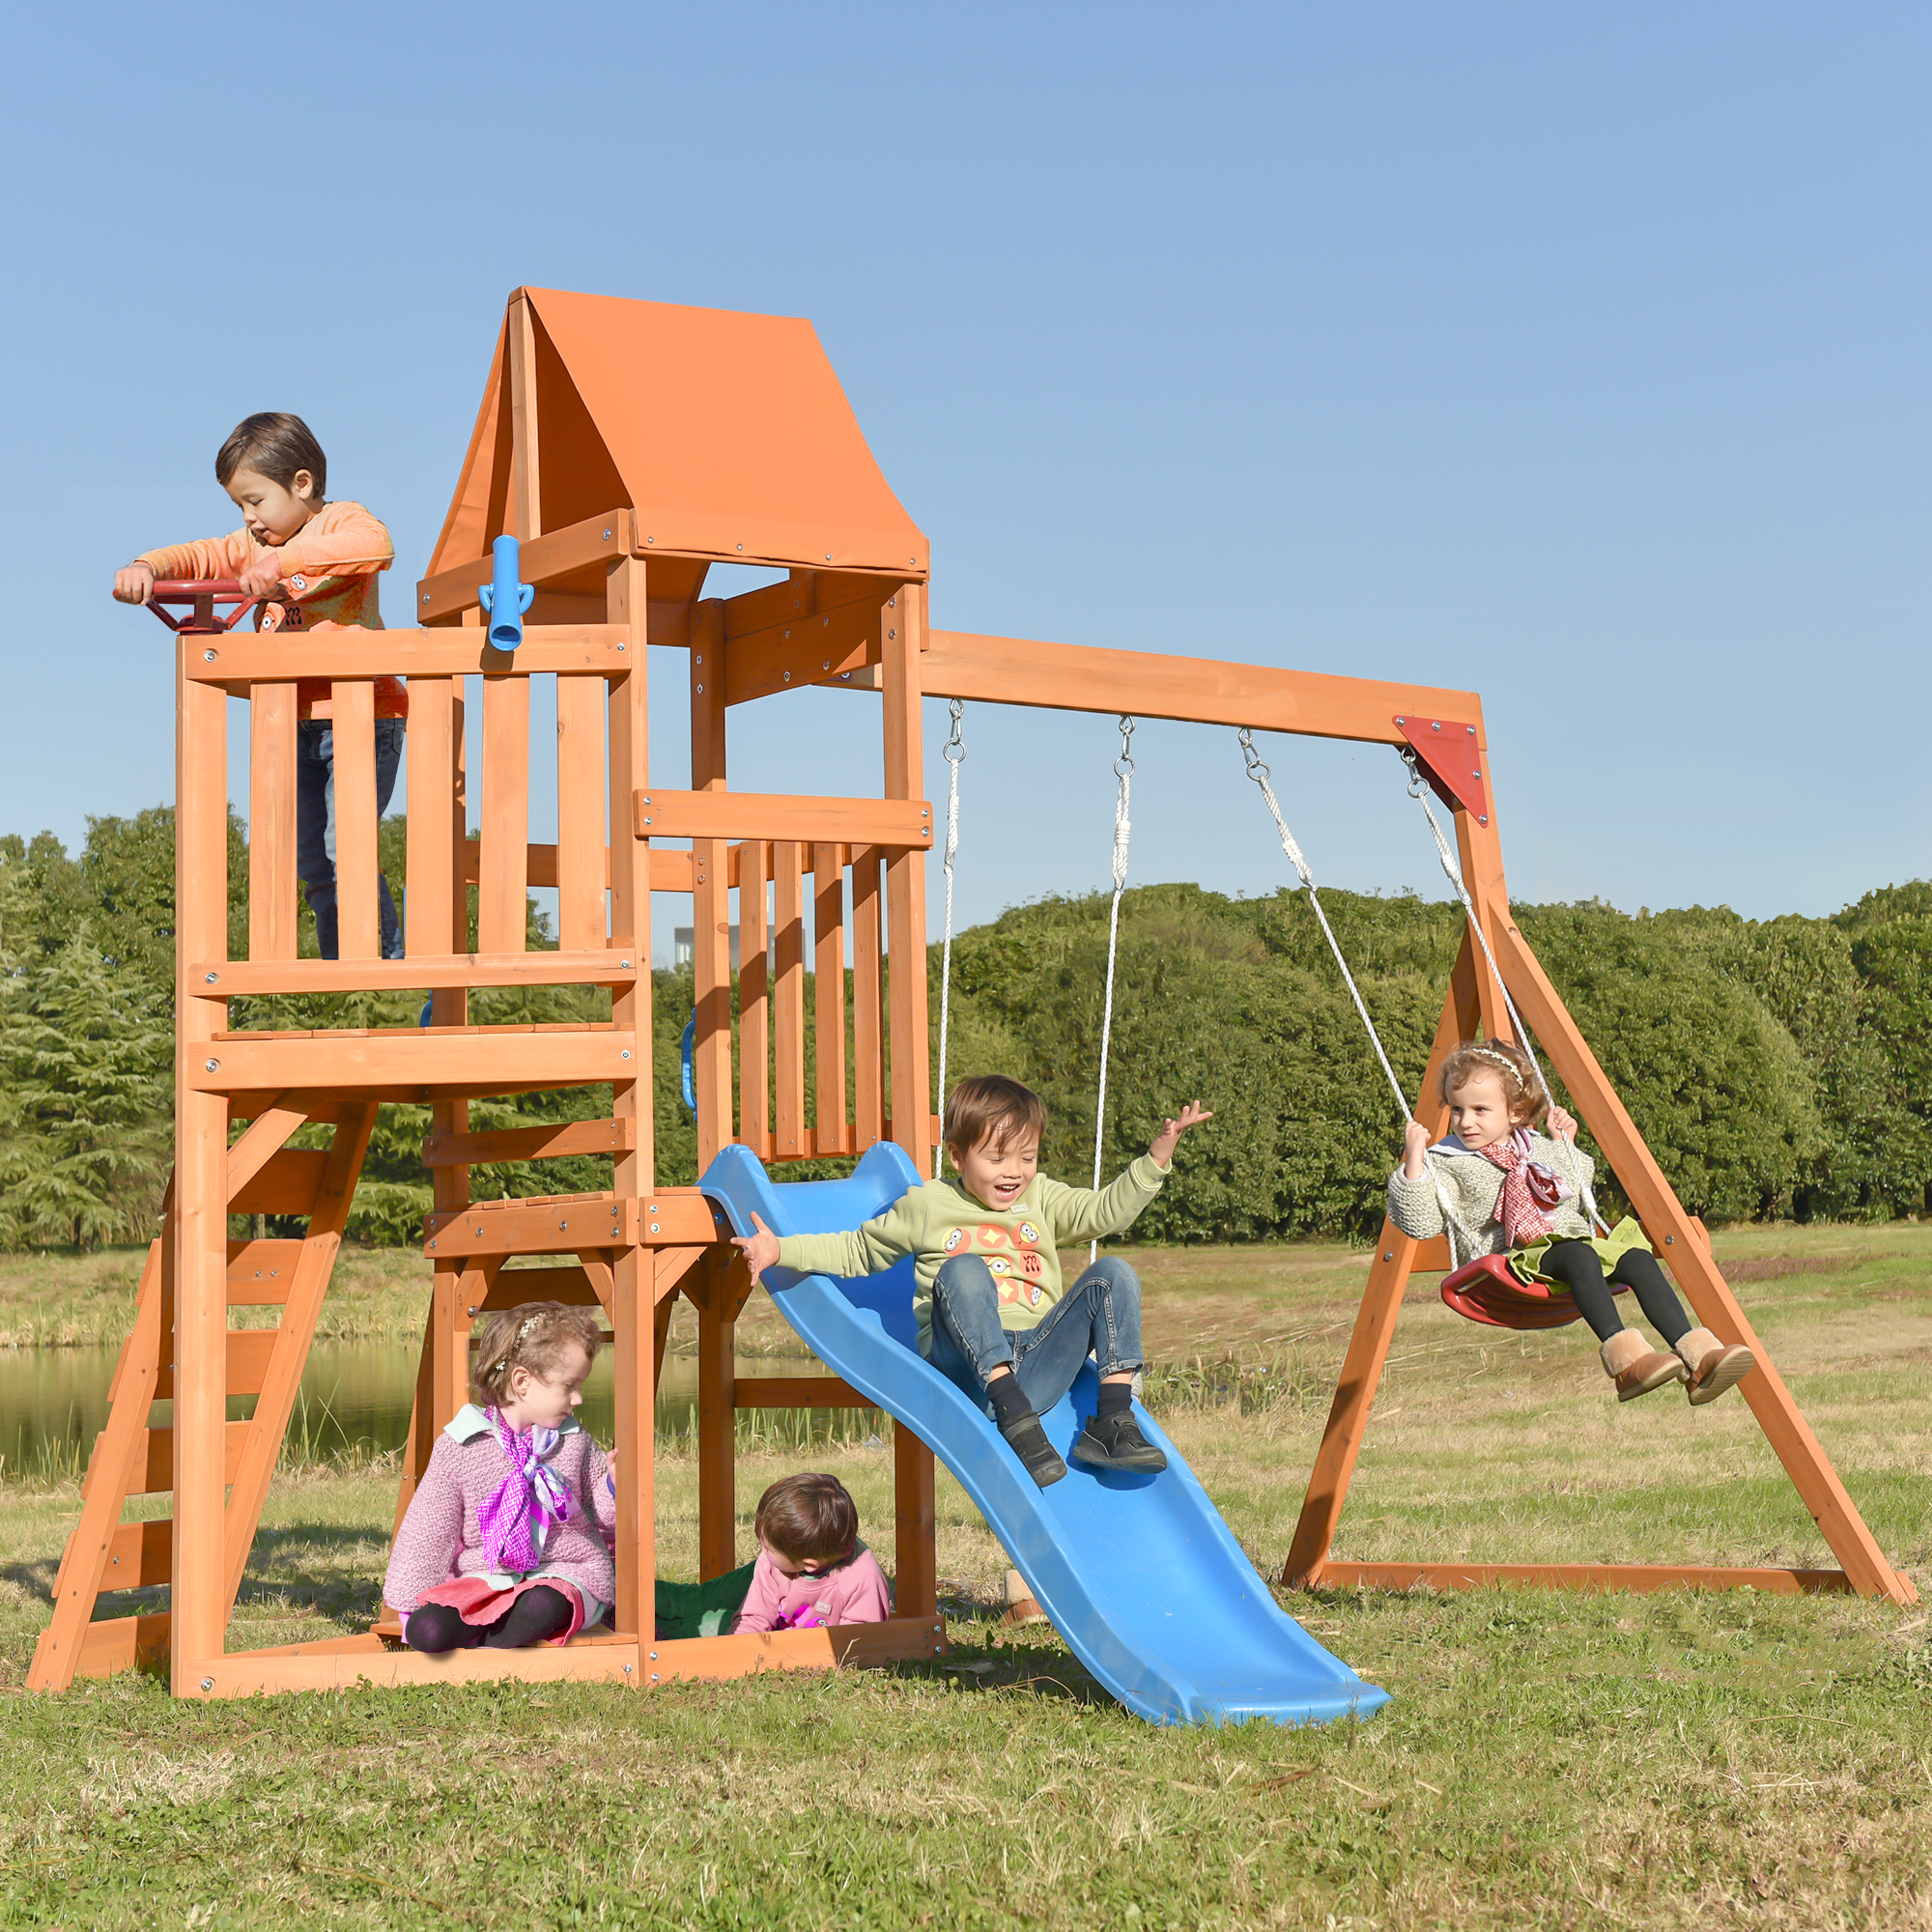 Wooden Swing Set with Slide, Climbing wall, Sandbox and Wood Roof, Outdoor Playhouse Backyard Activity Playground Playset for Toddlers-CASAINC